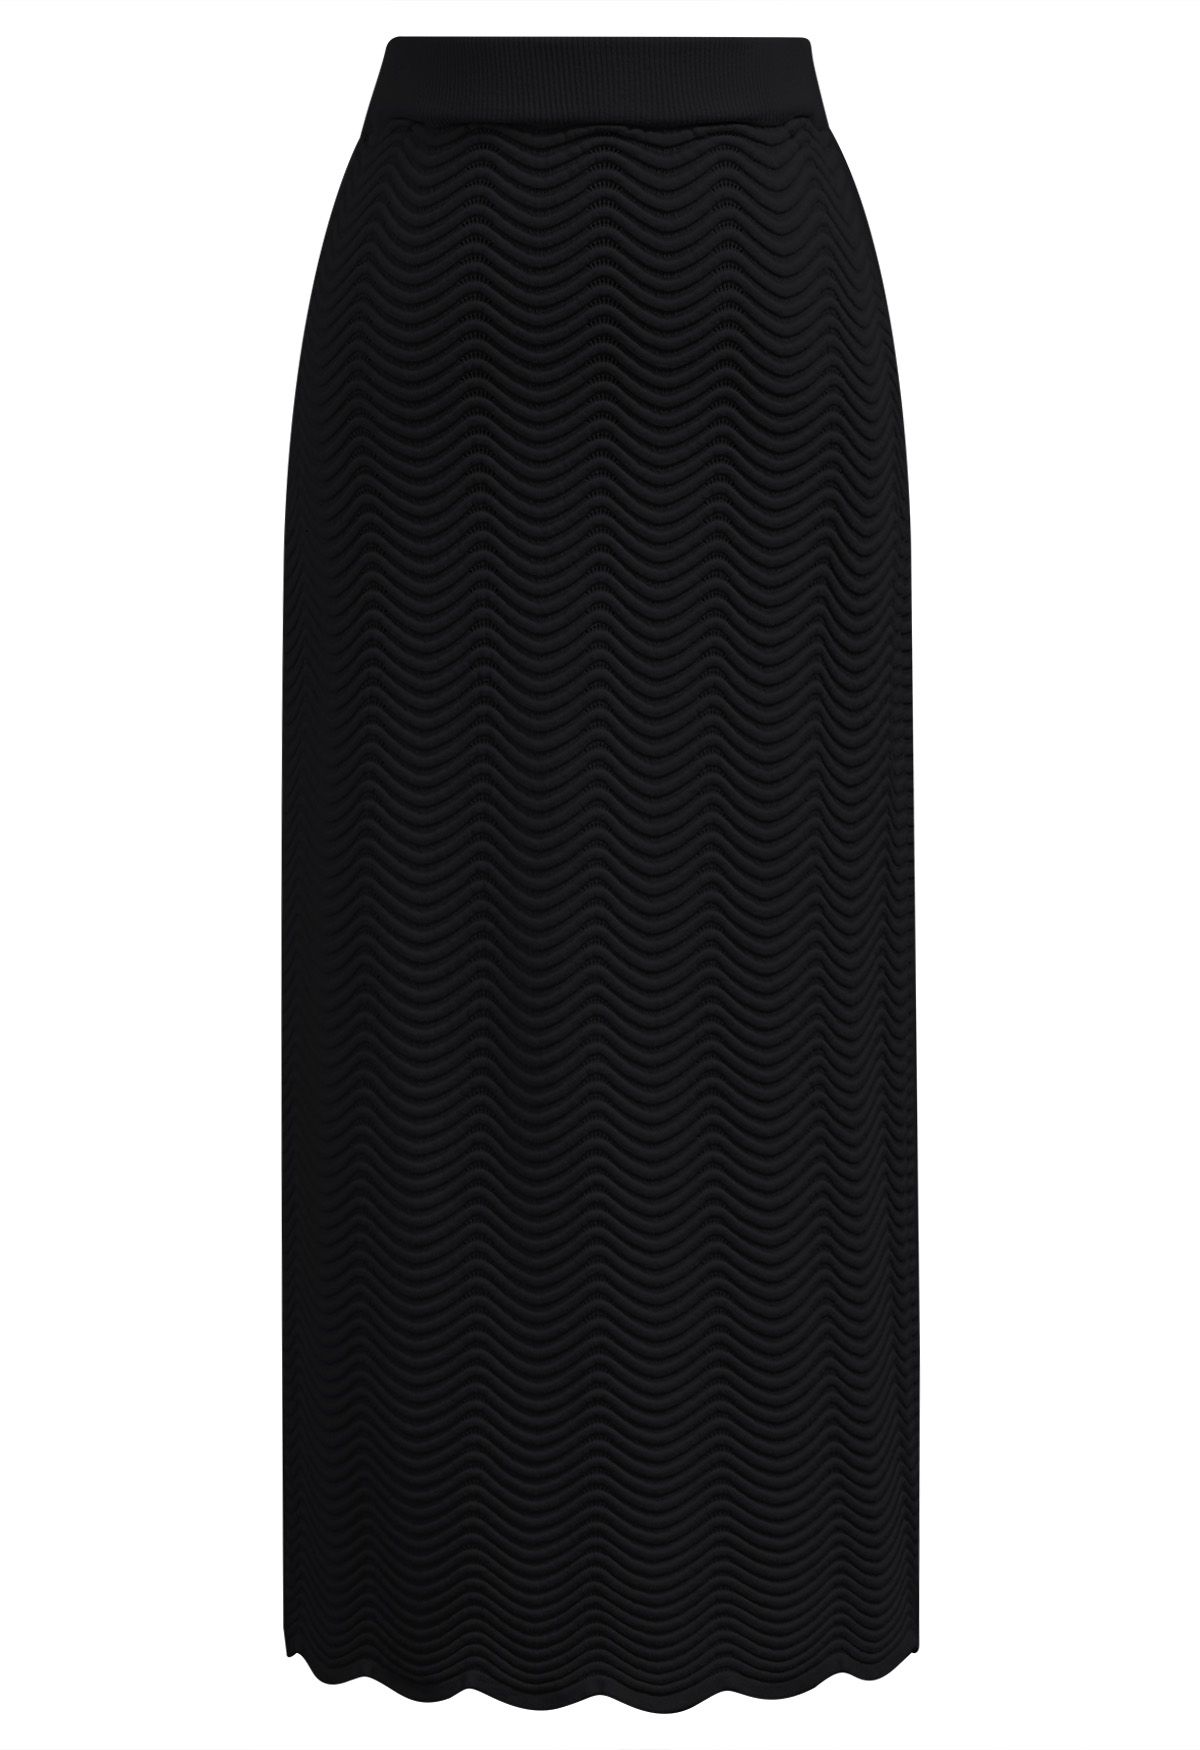 Embossed Wavy Texture Knit Pencil Skirt in Black